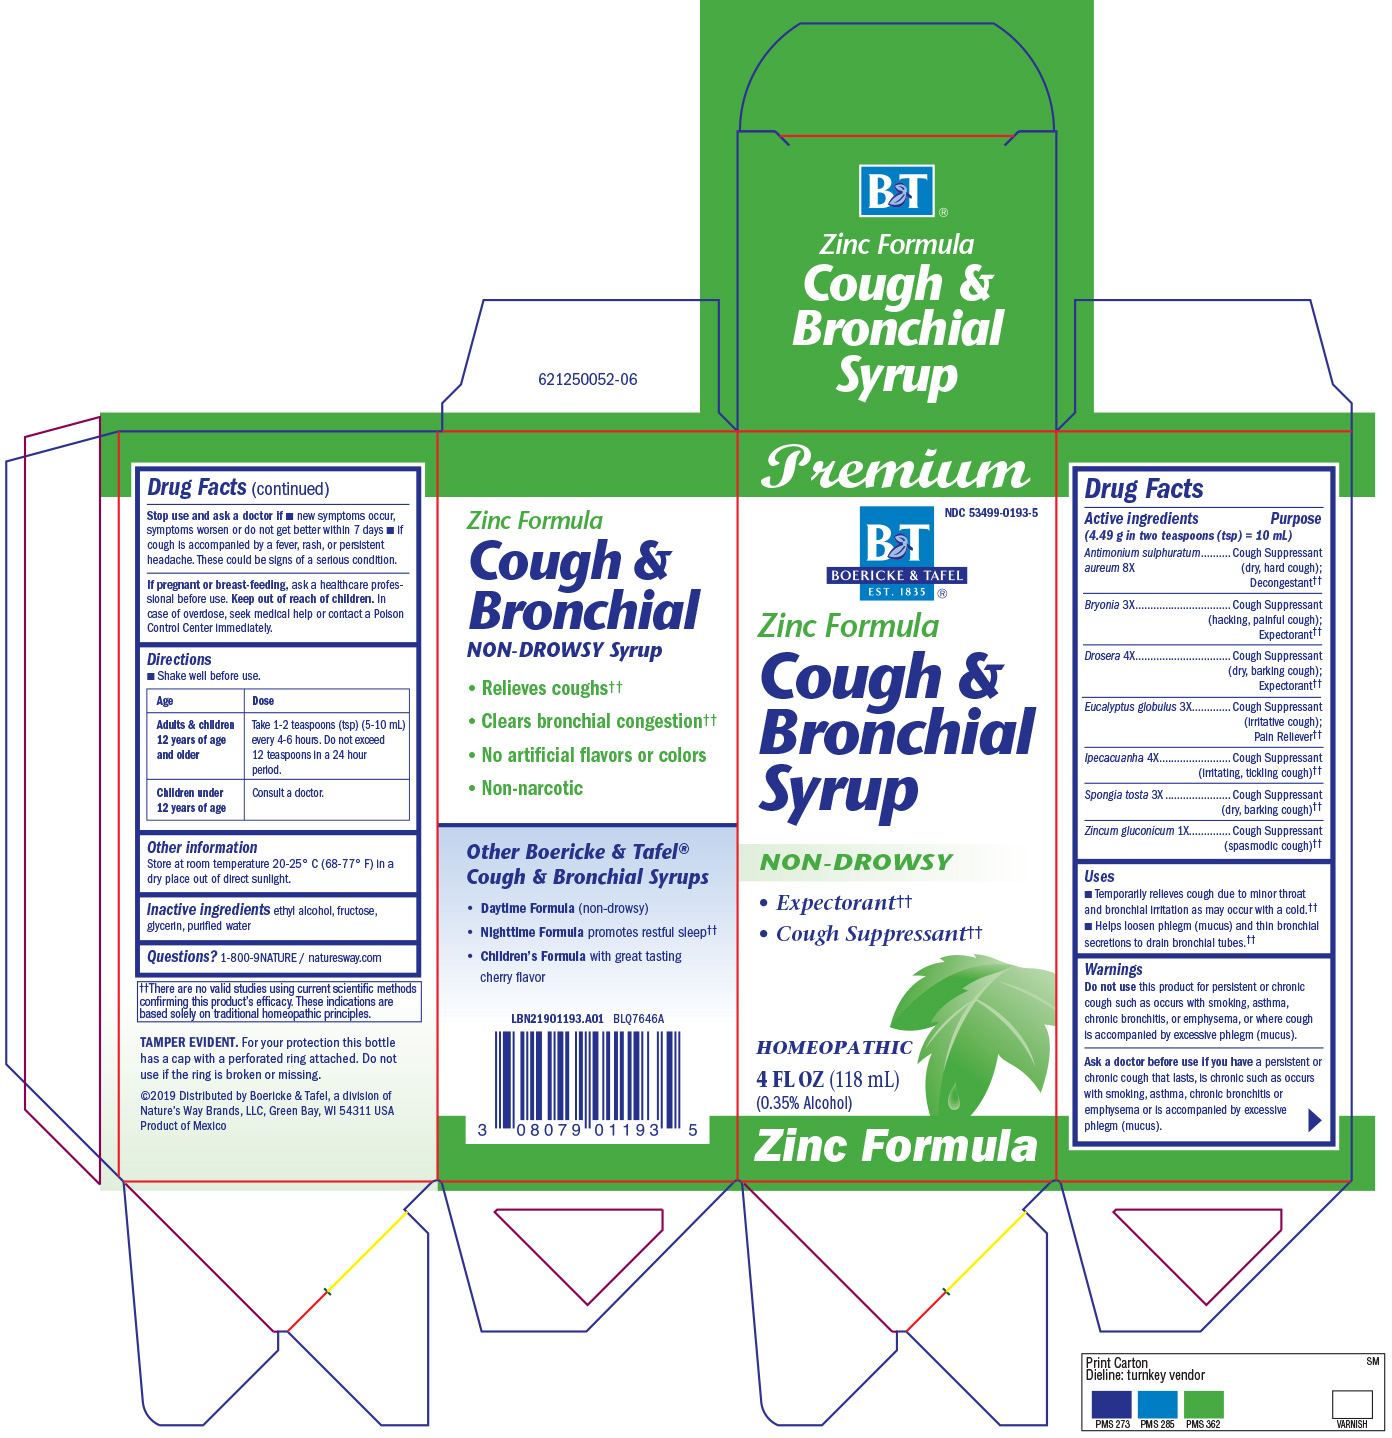 21901193_A01-BT Cough Bronchical with Zinc Syrup.jpg